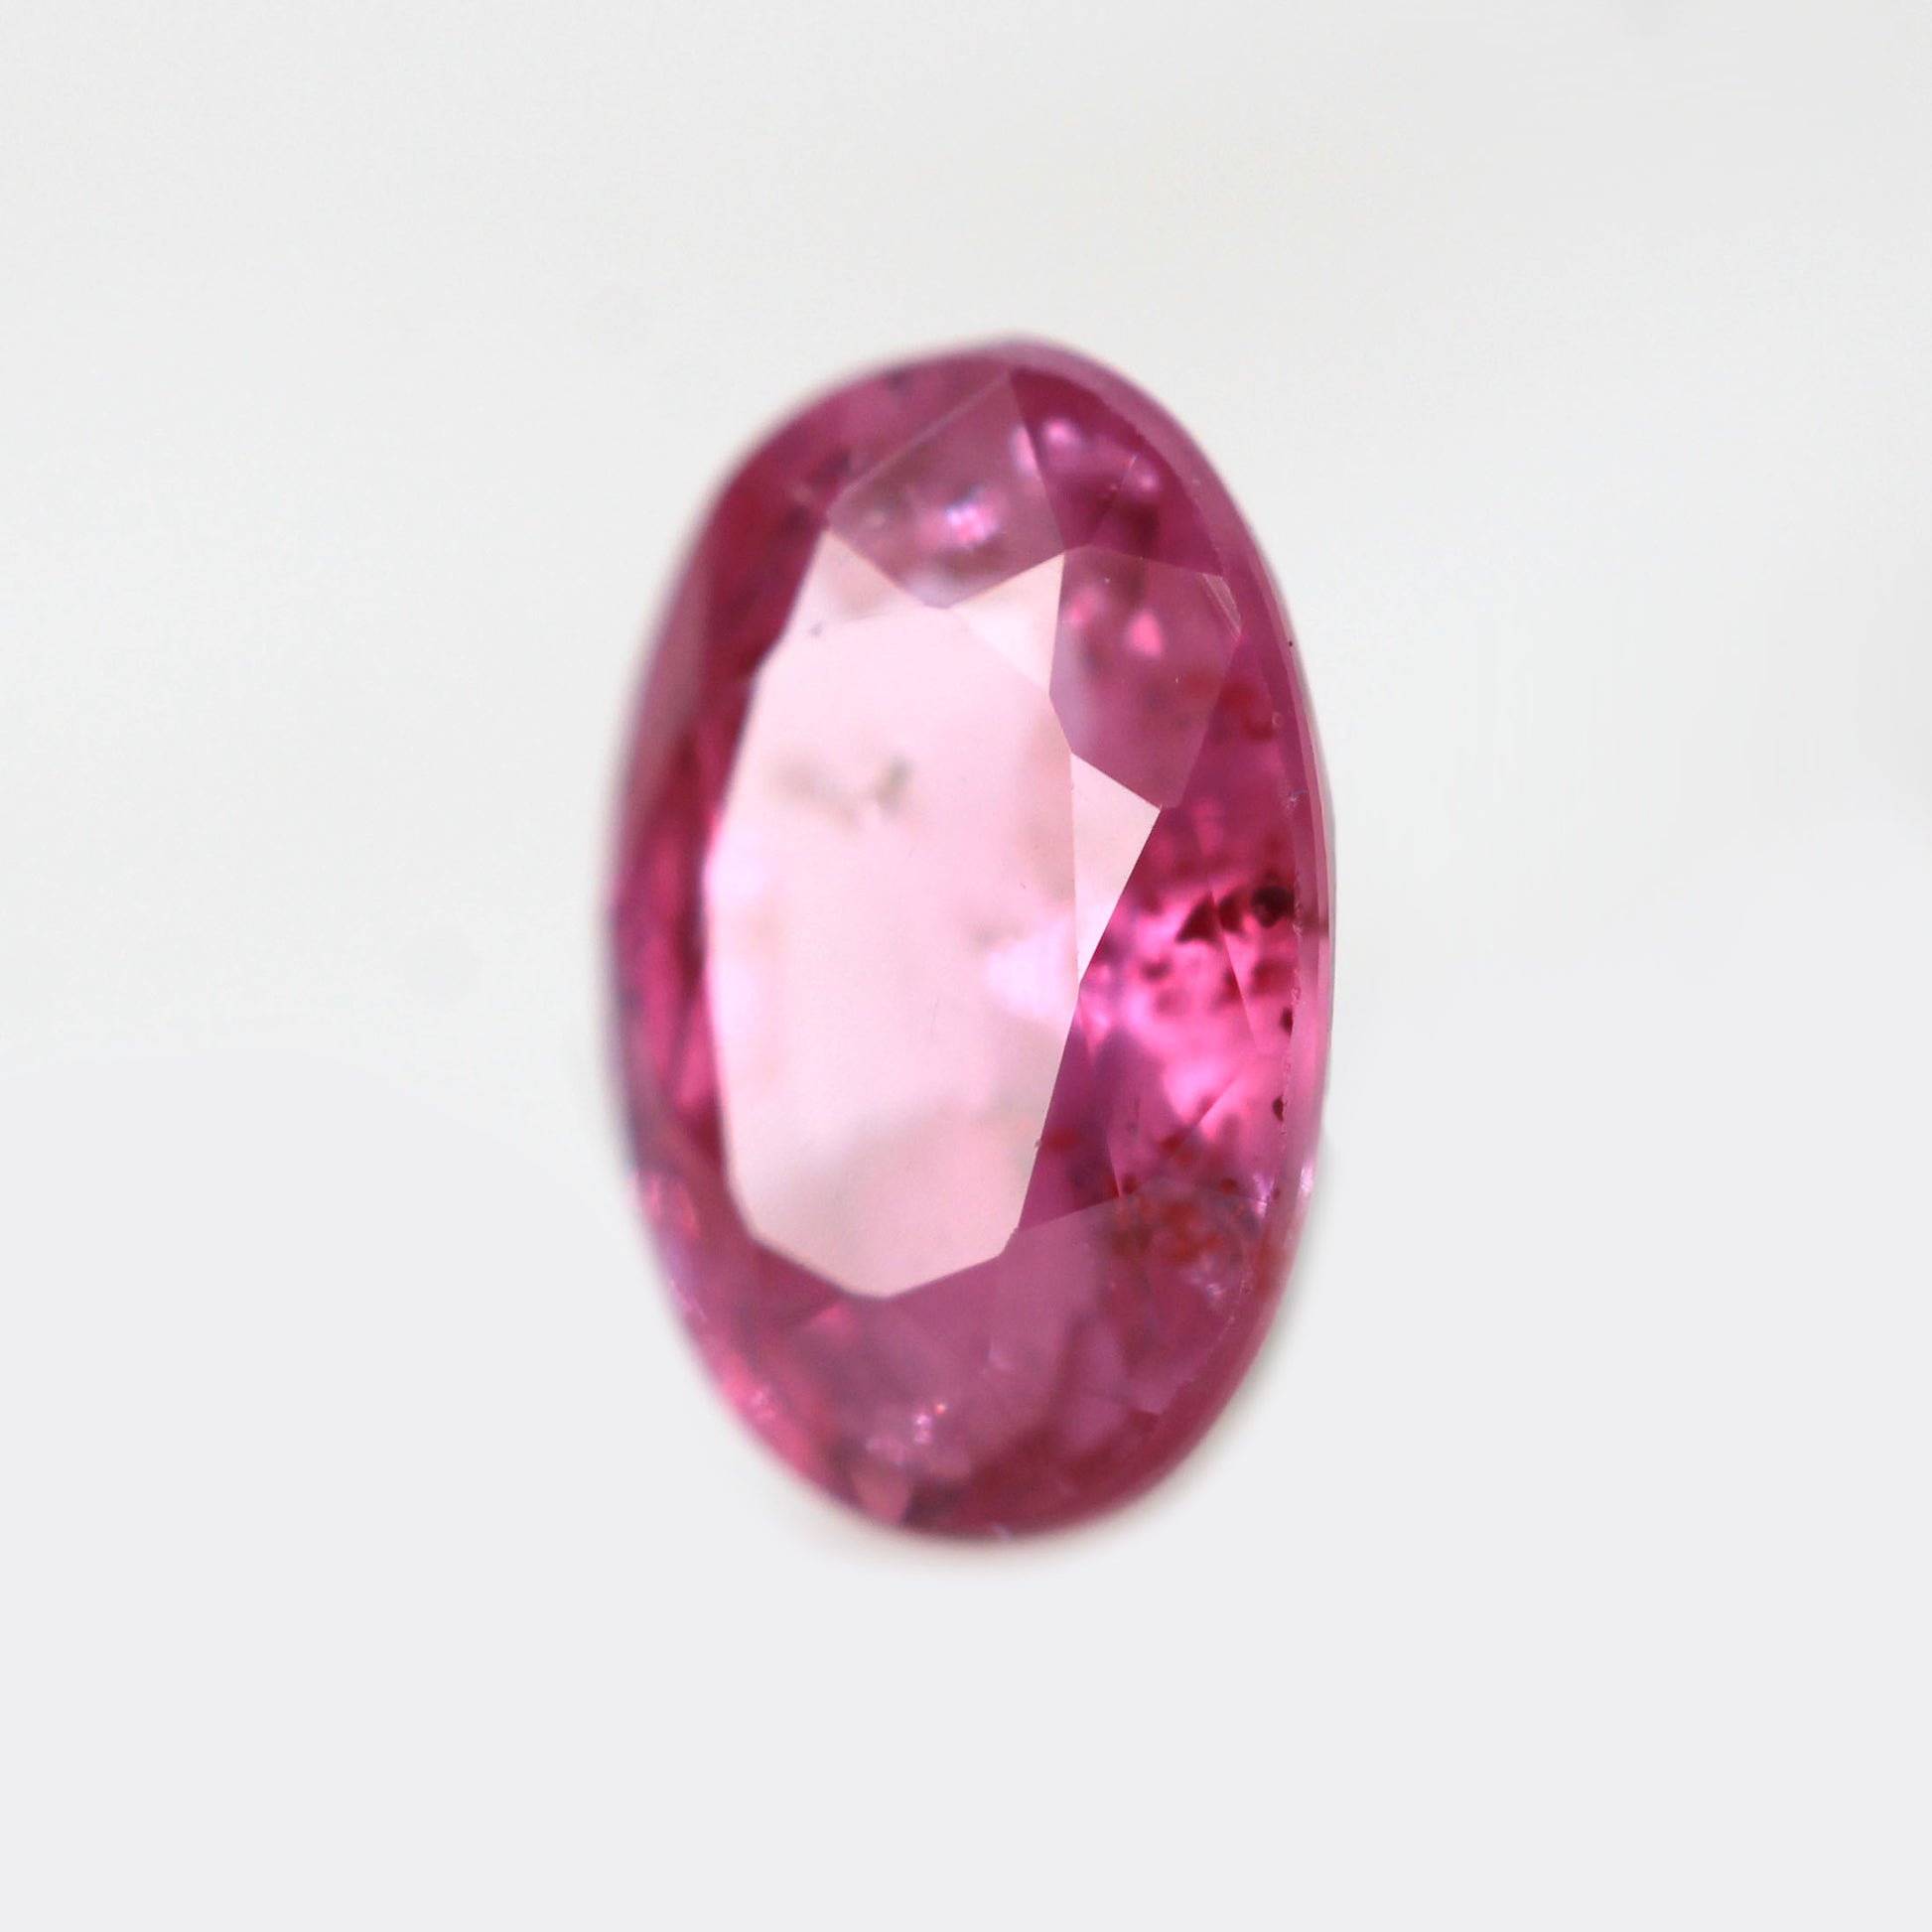 0.60 Carat Oval Red Pink Sapphire for Custom Work - Inventory Code ORPS060 - Midwinter Co. Alternative Bridal Rings and Modern Fine Jewelry